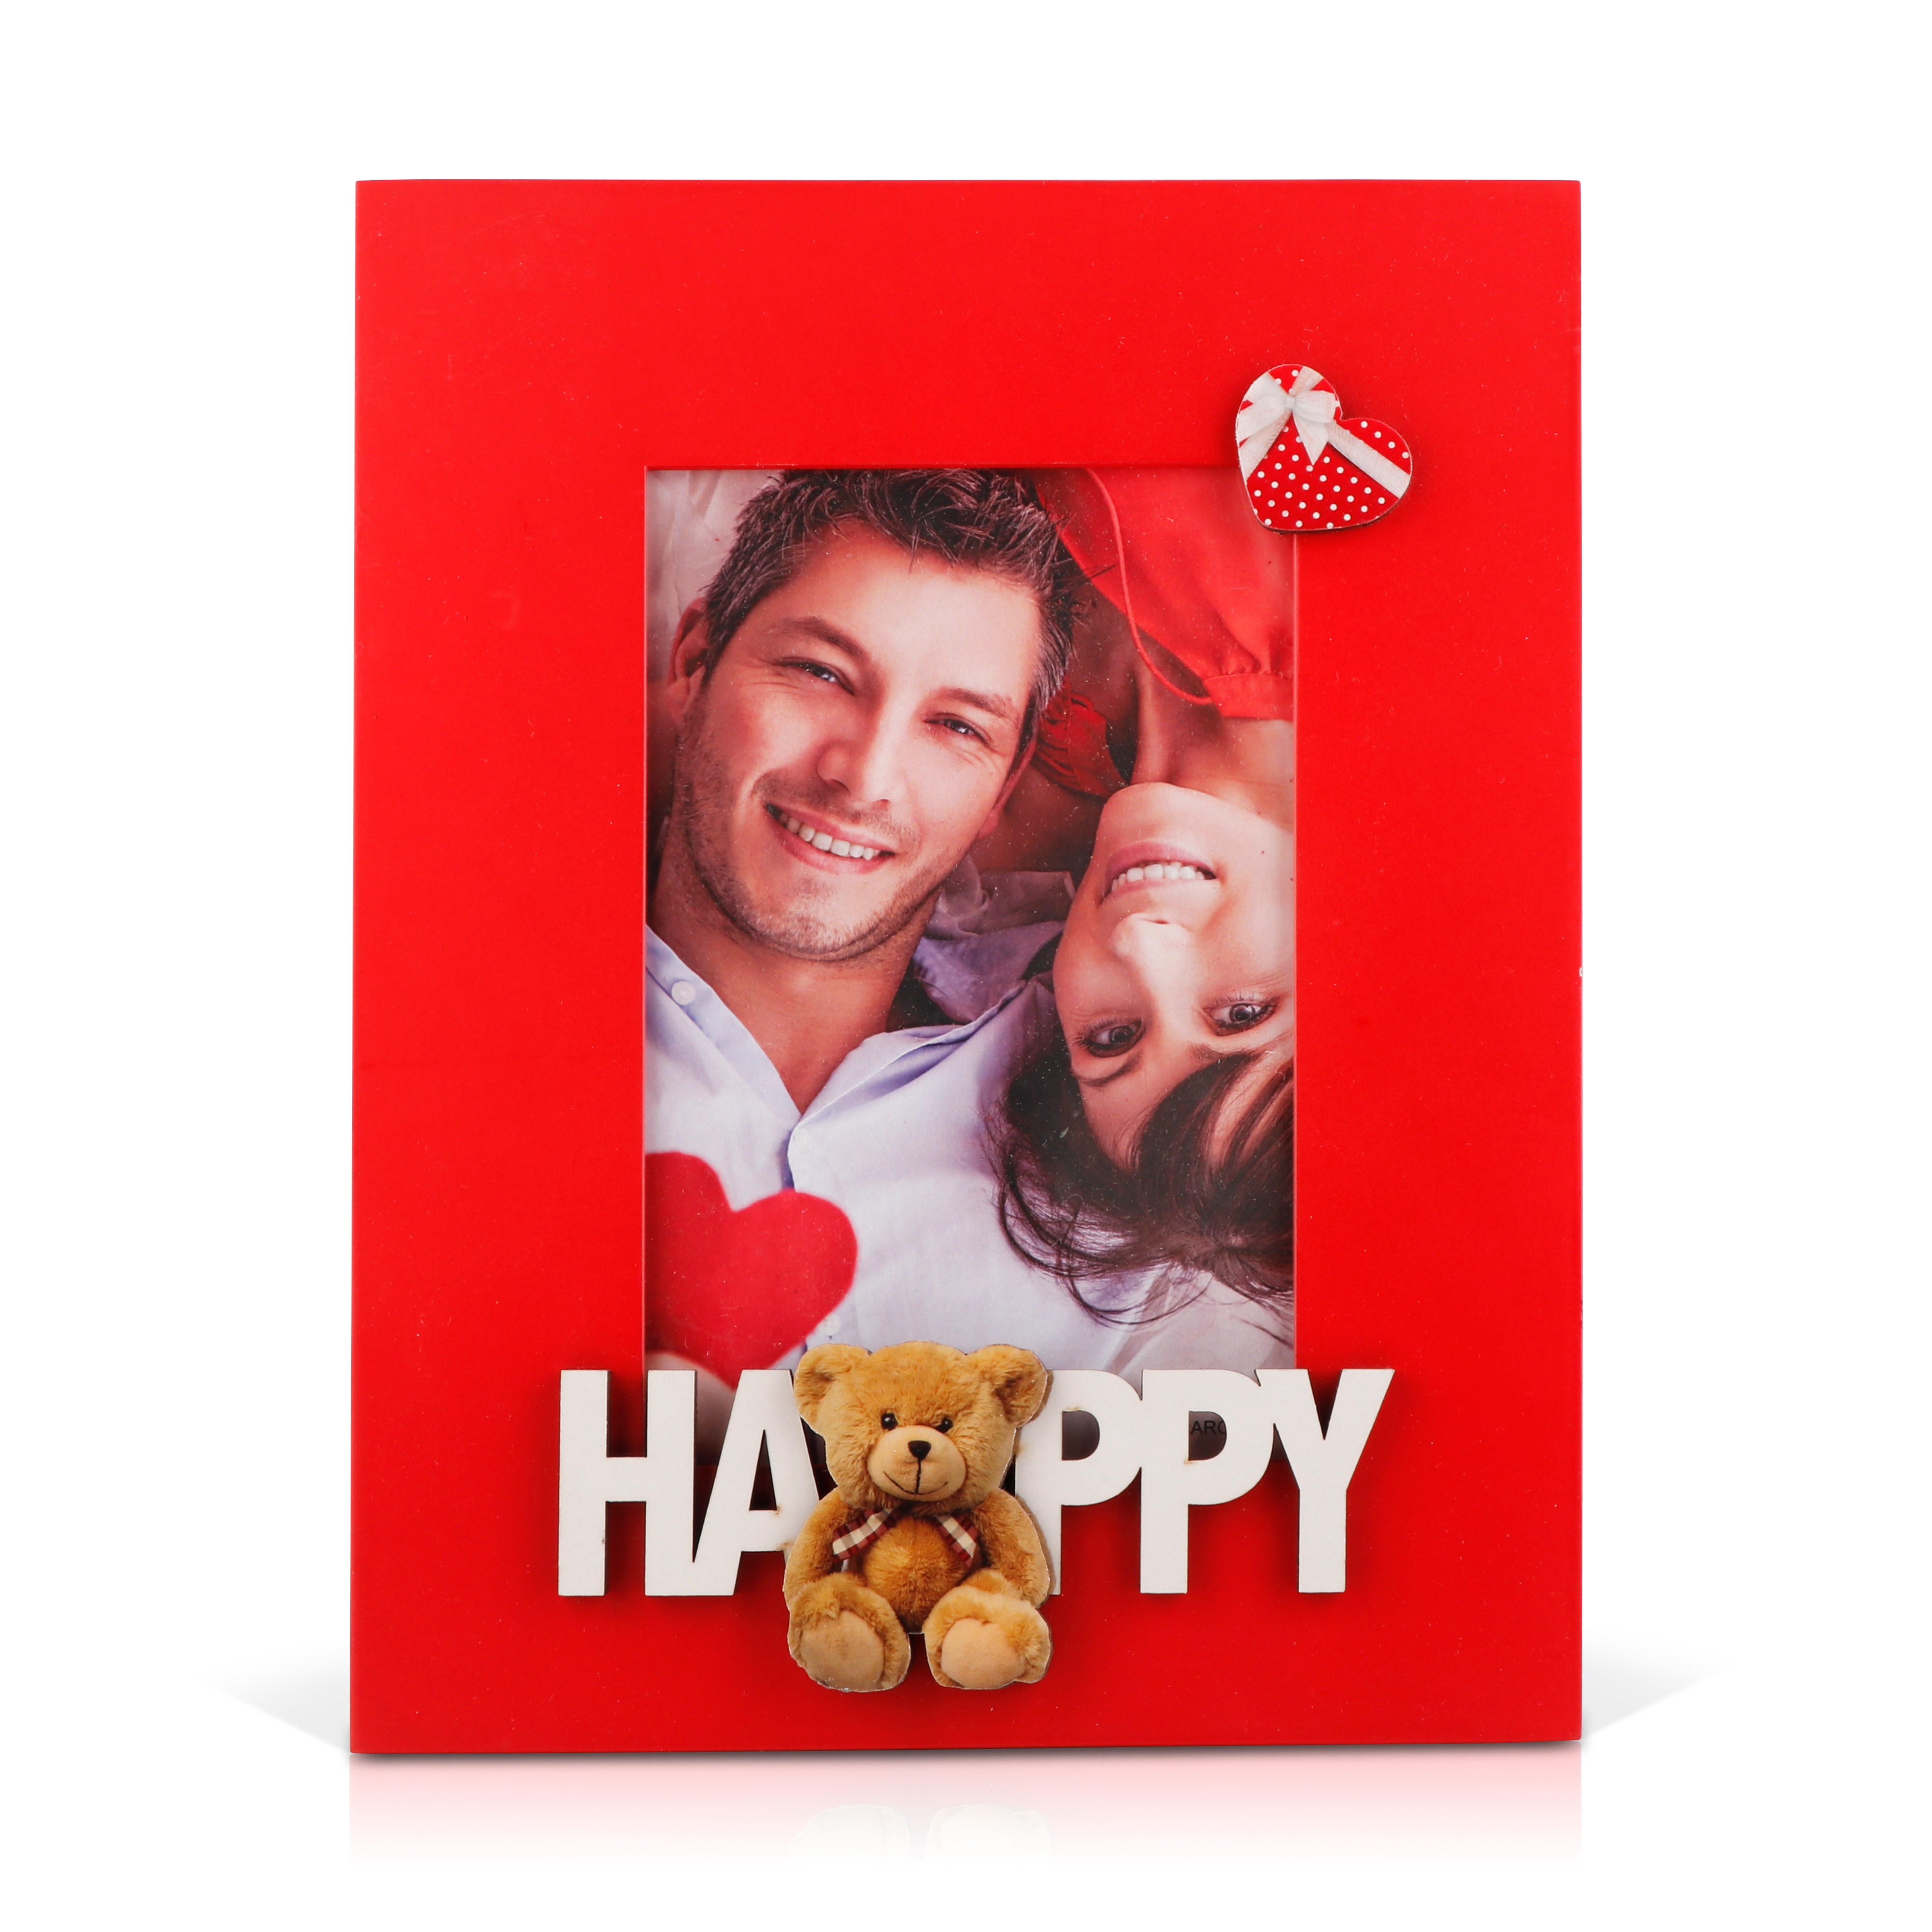 Archies Red Happy Photoframe for couples